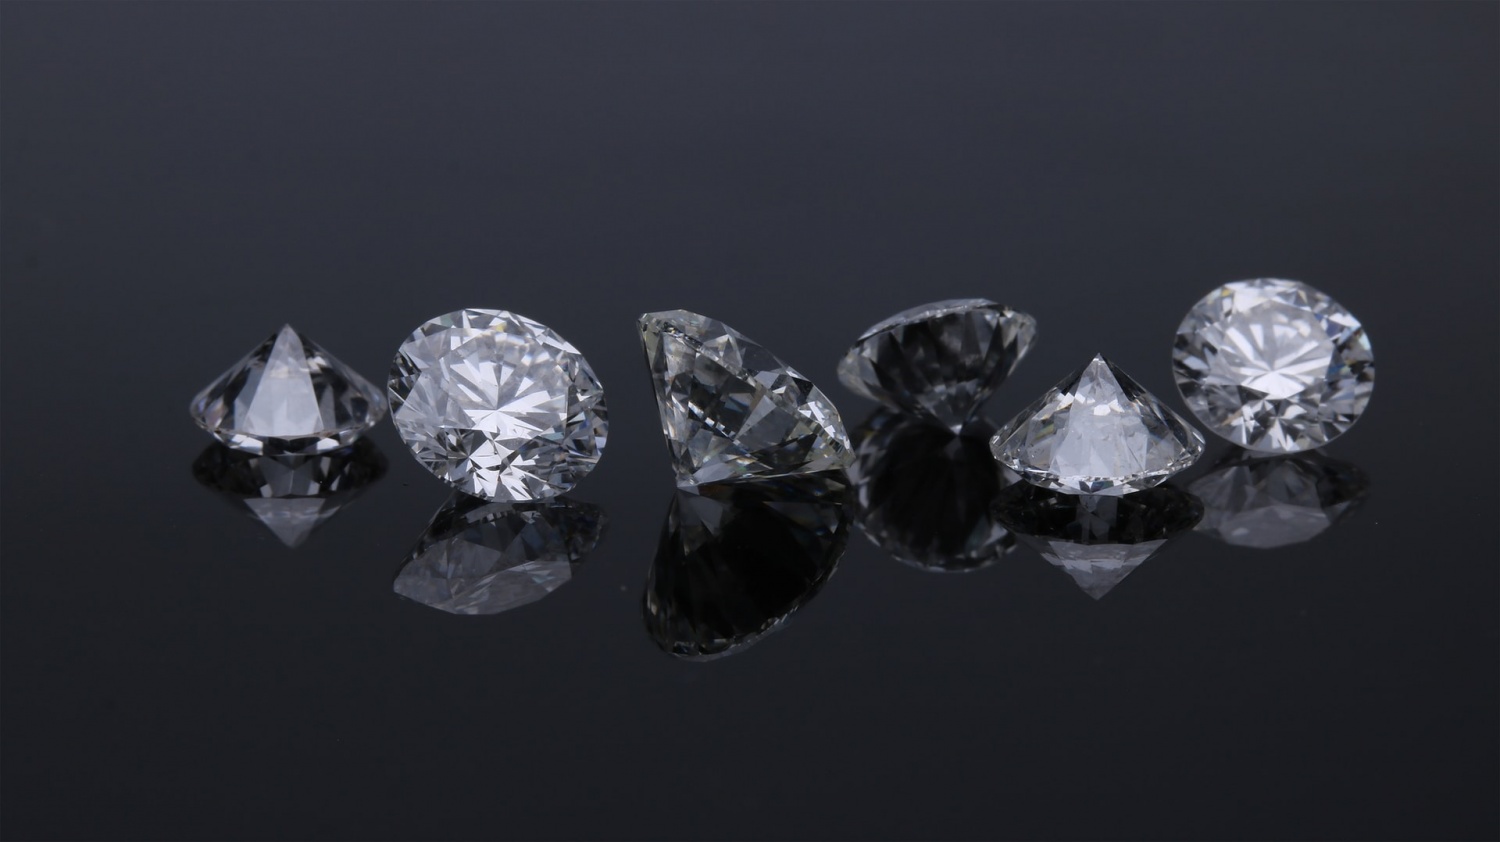 555.55 Carat 'Space Diamond' Purchased by Founder of HEX.com for Over $4.2 Million Worth of Crypto